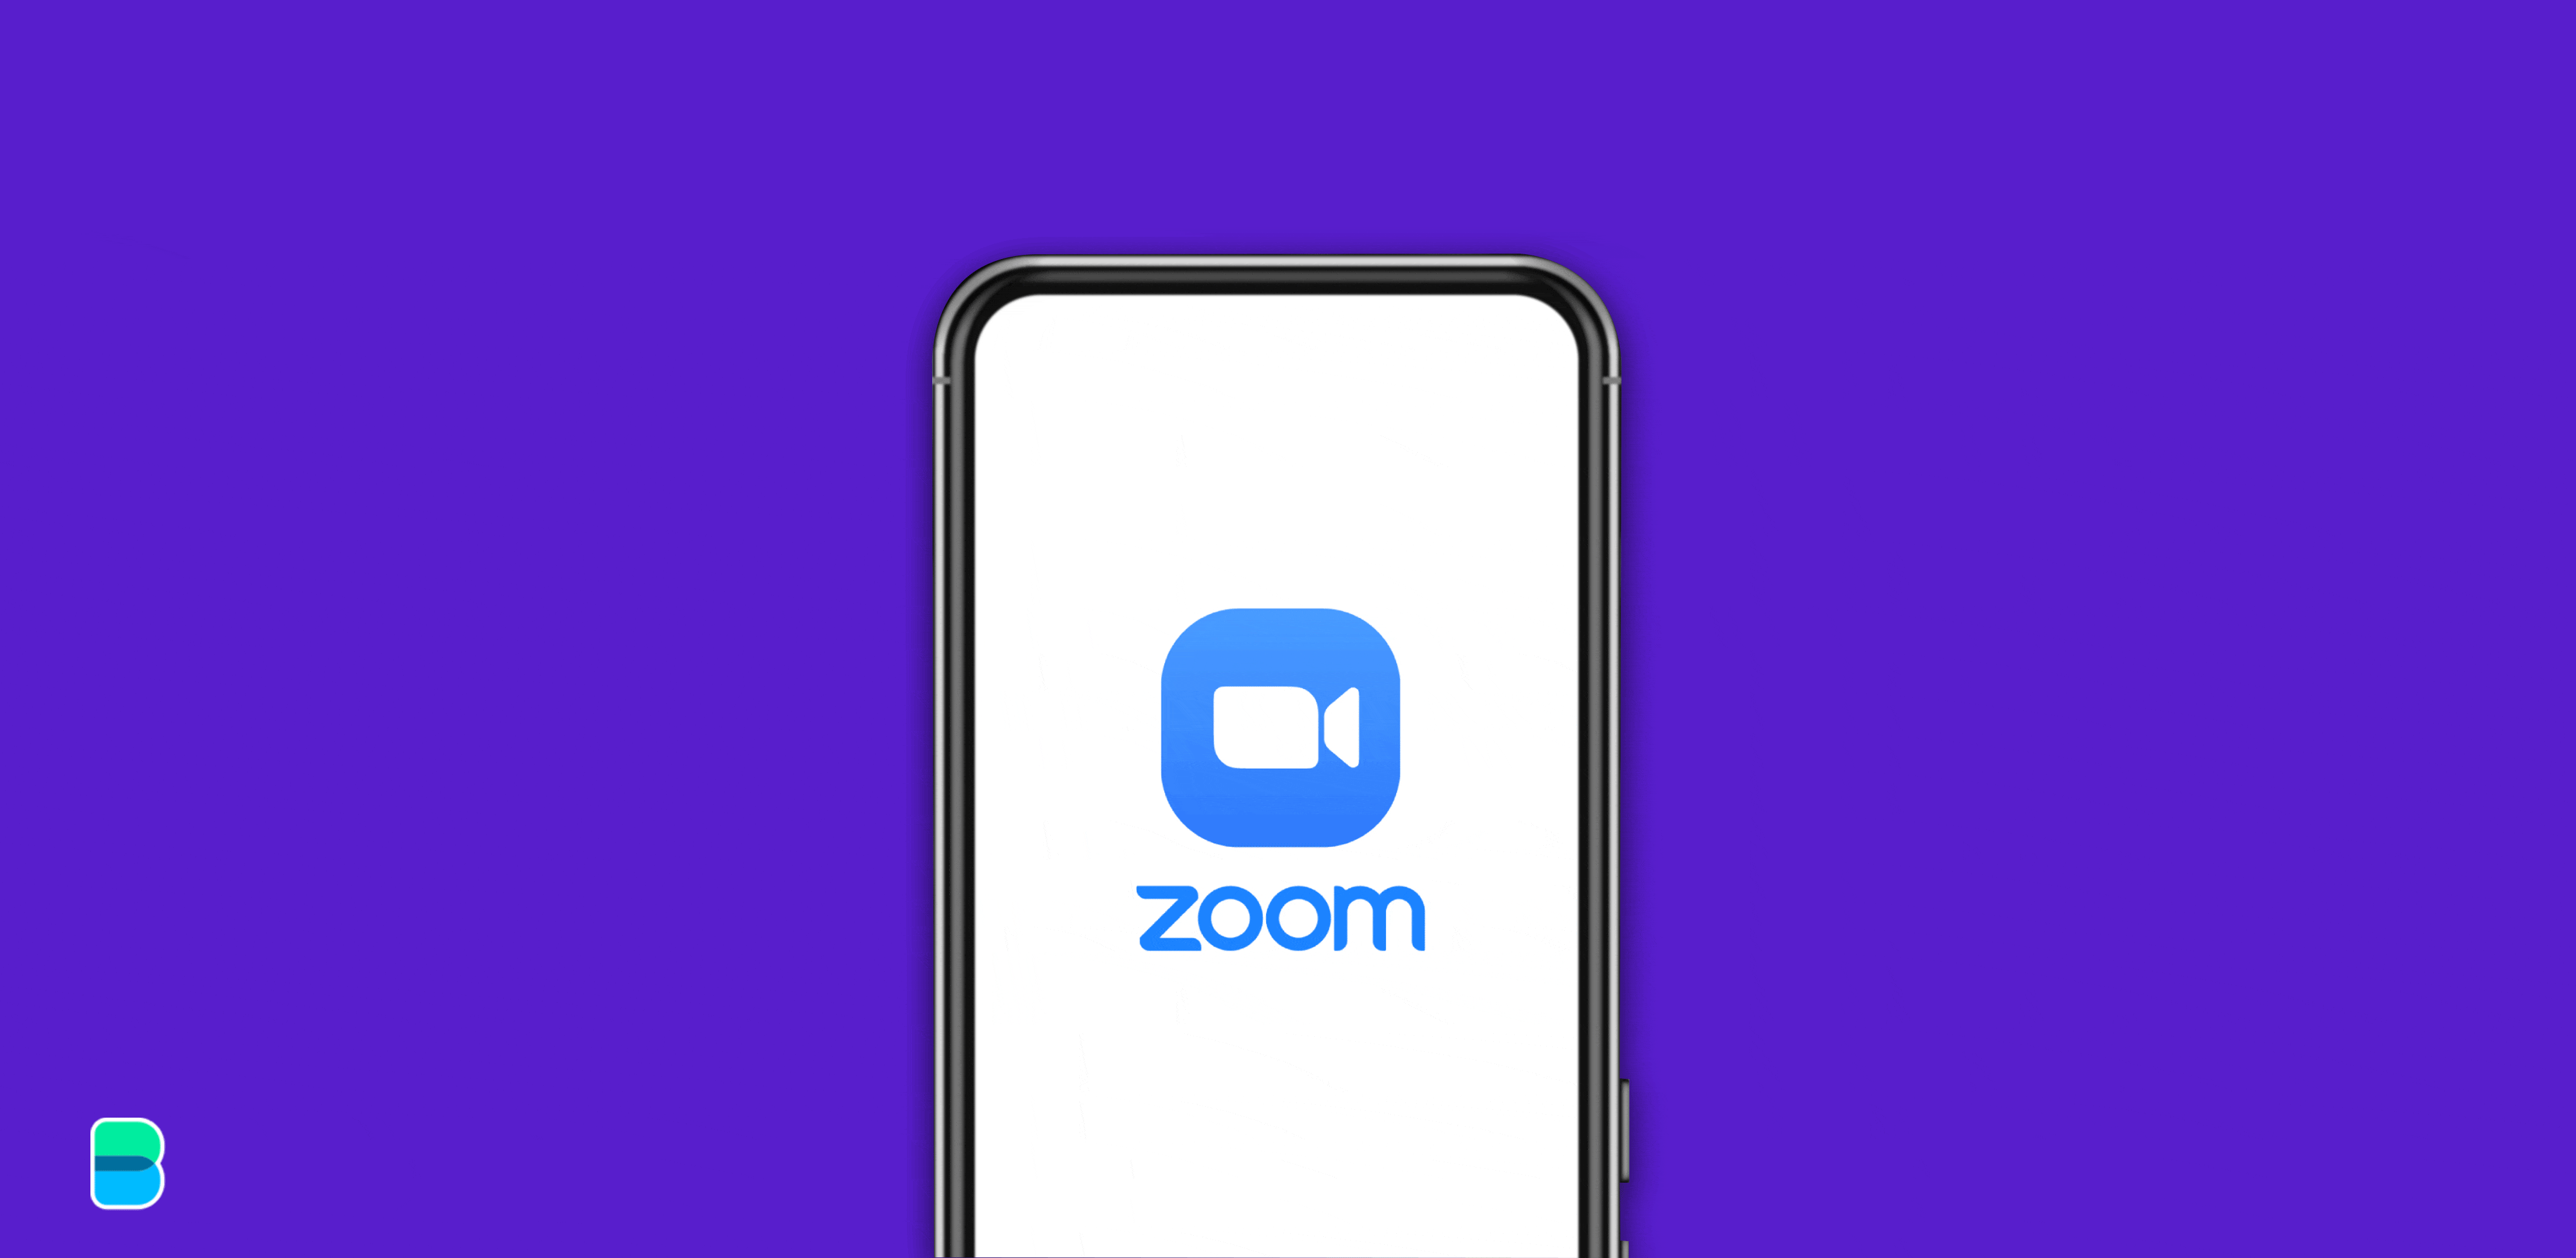 Zoom proves that nothing in this world is free